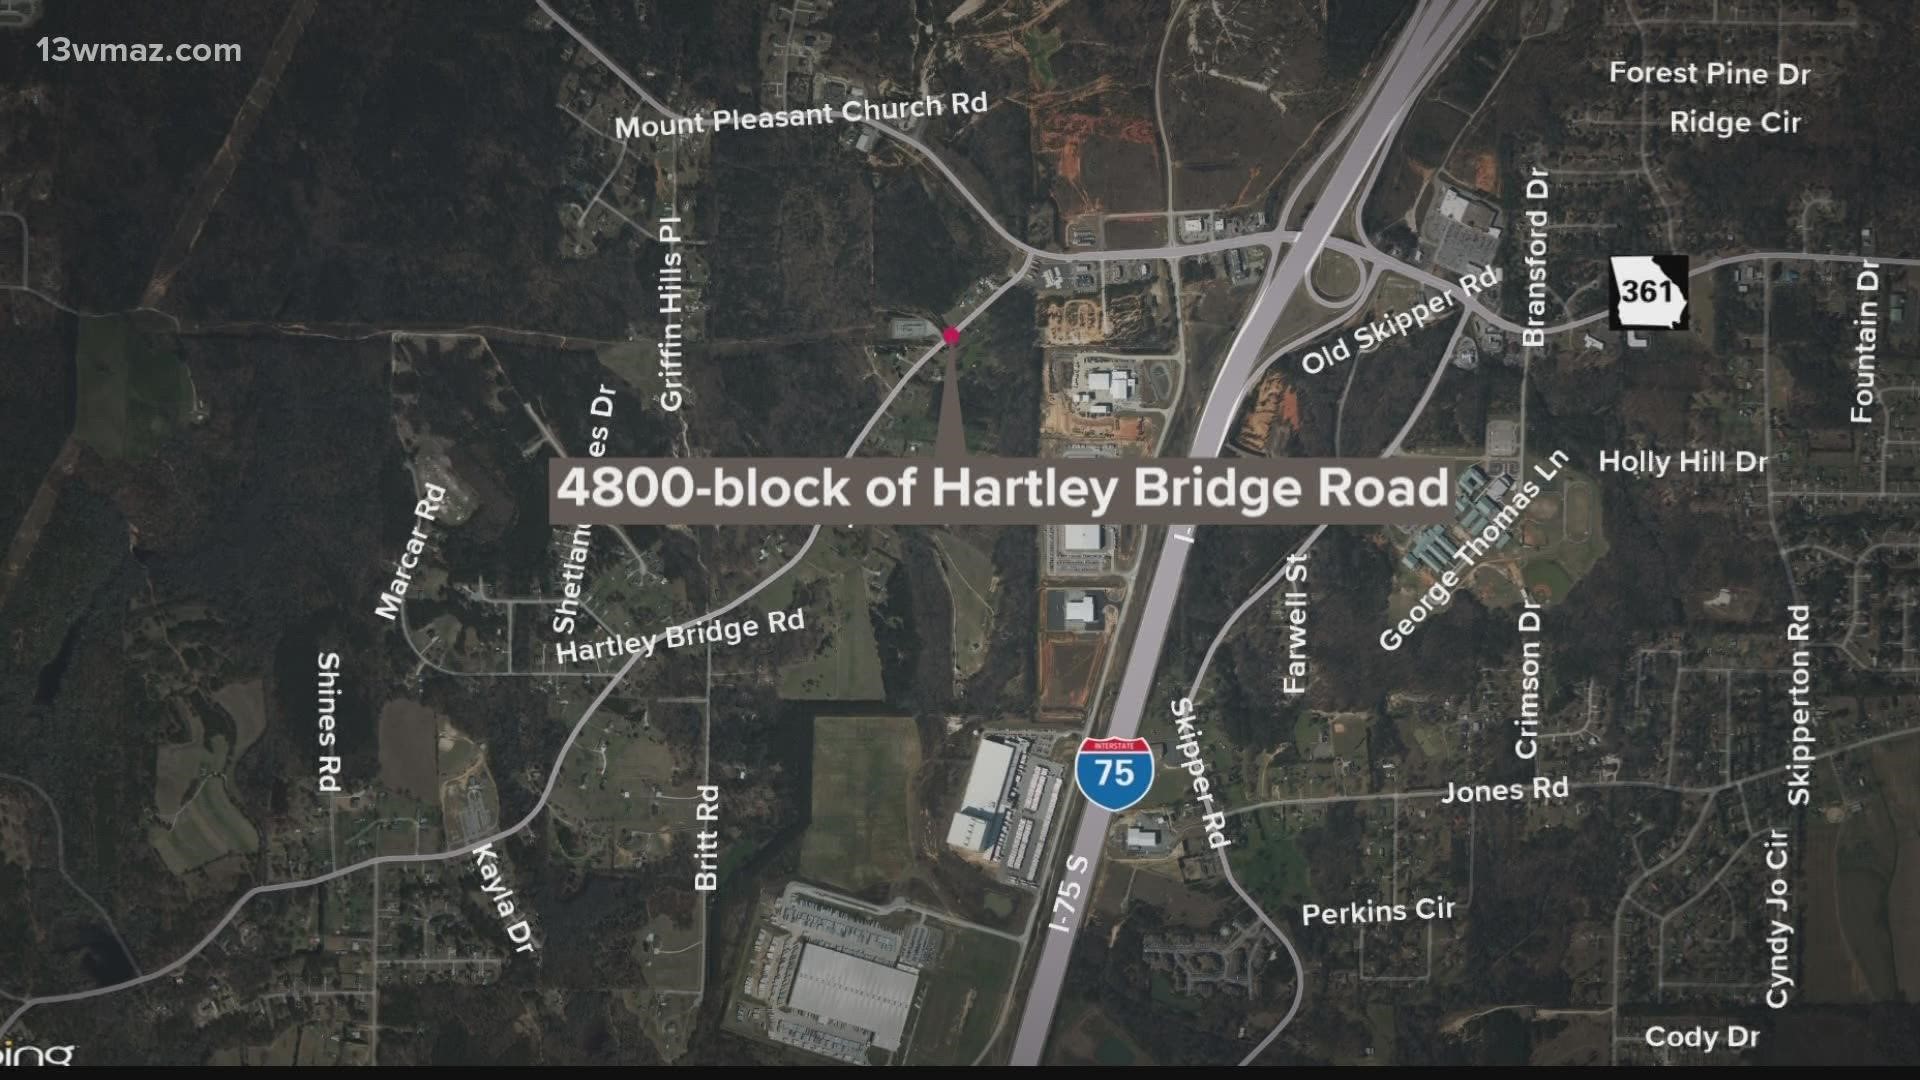 A man is dead after hitting a tree on Hartley Bridge Road